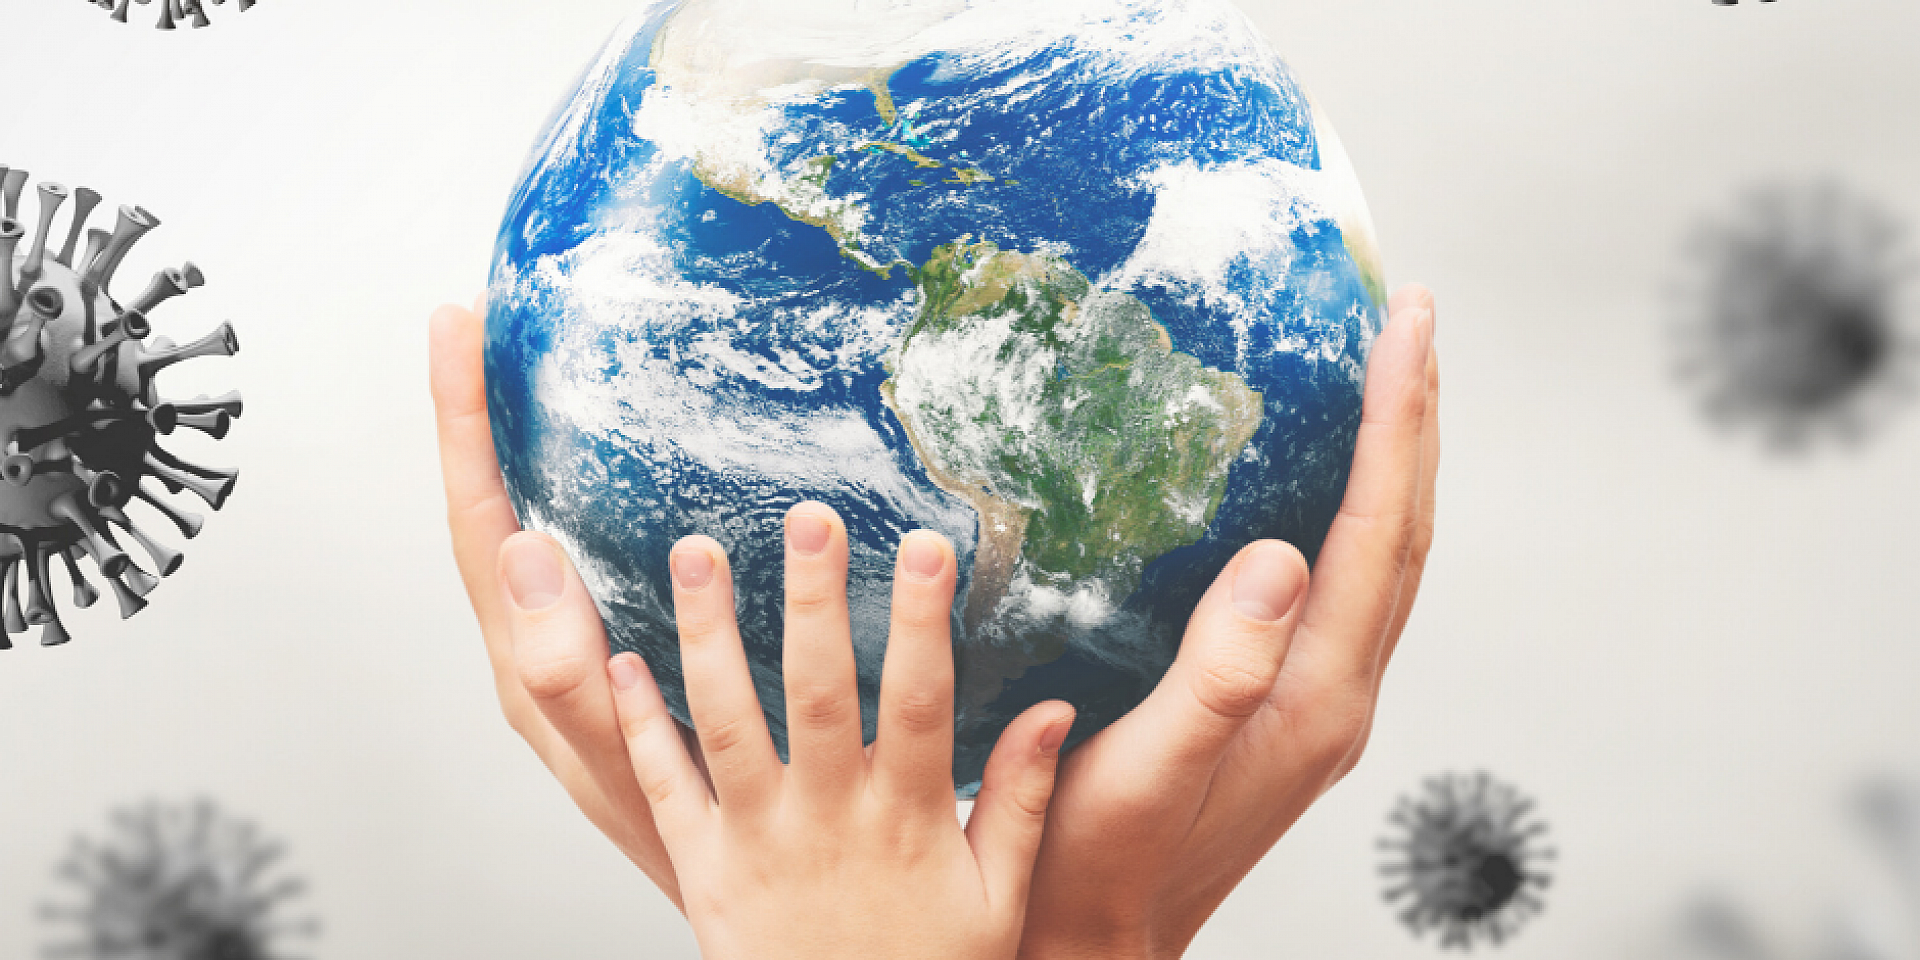 Hands holding a terrestrial globe